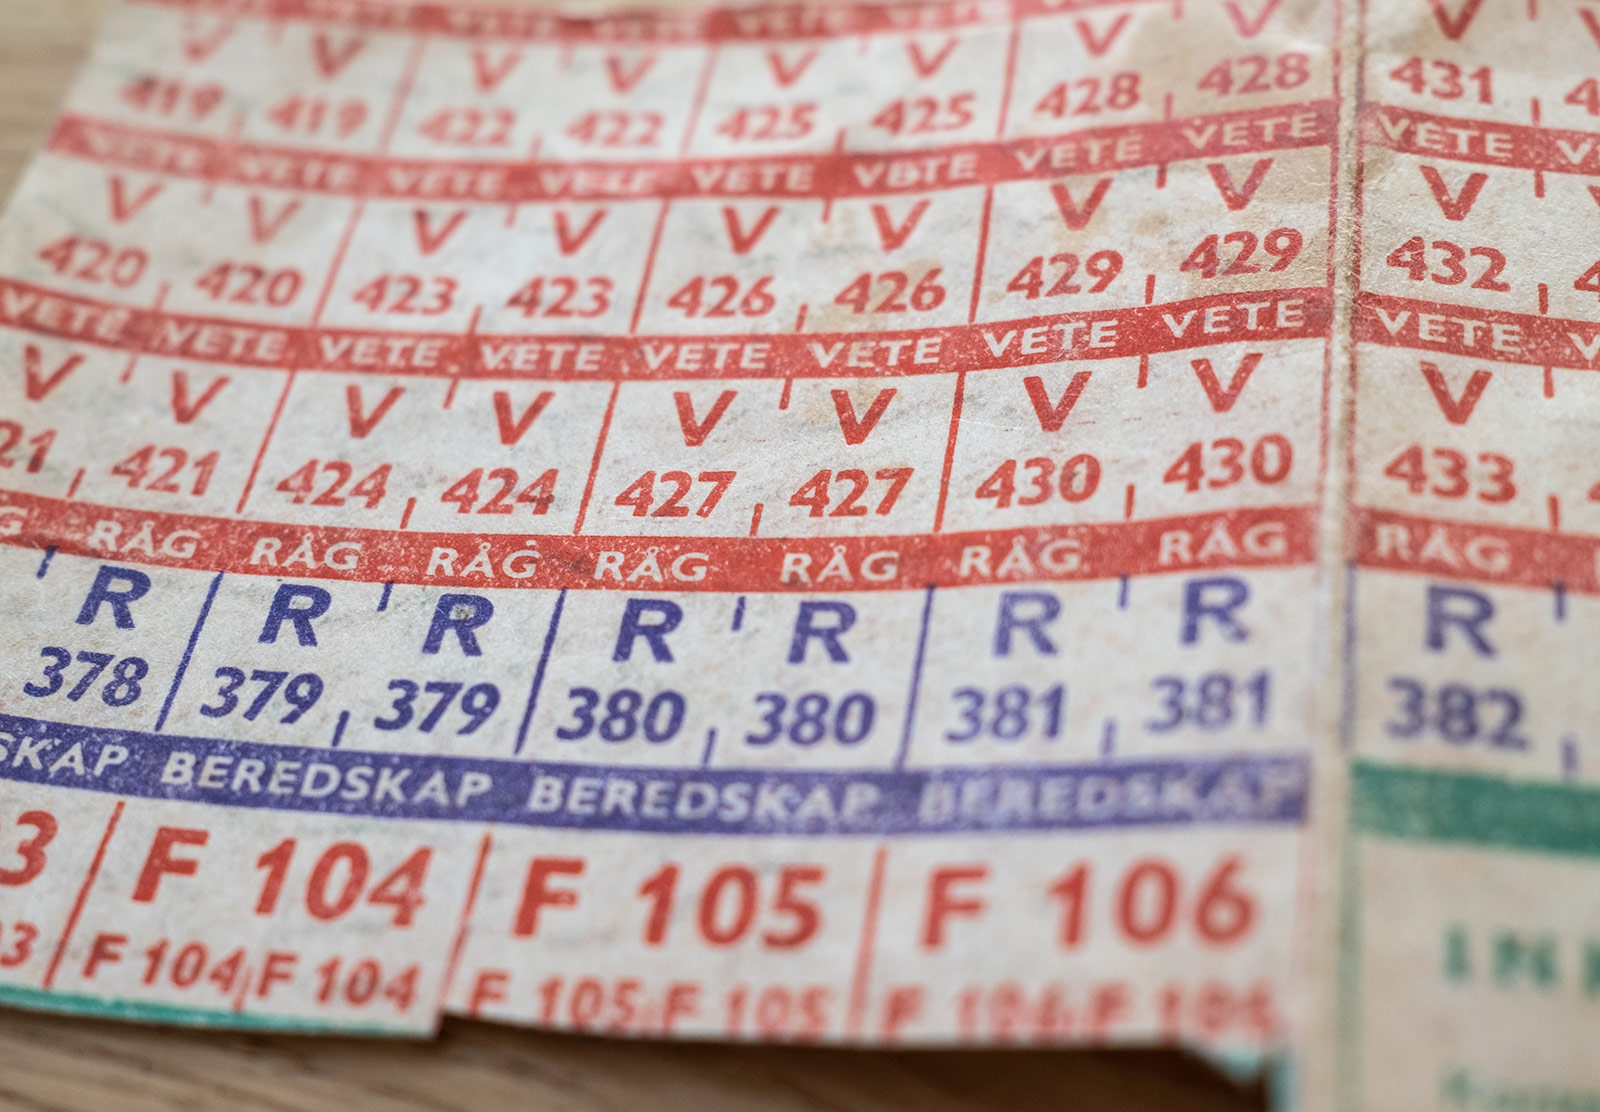 Coupons marked råg